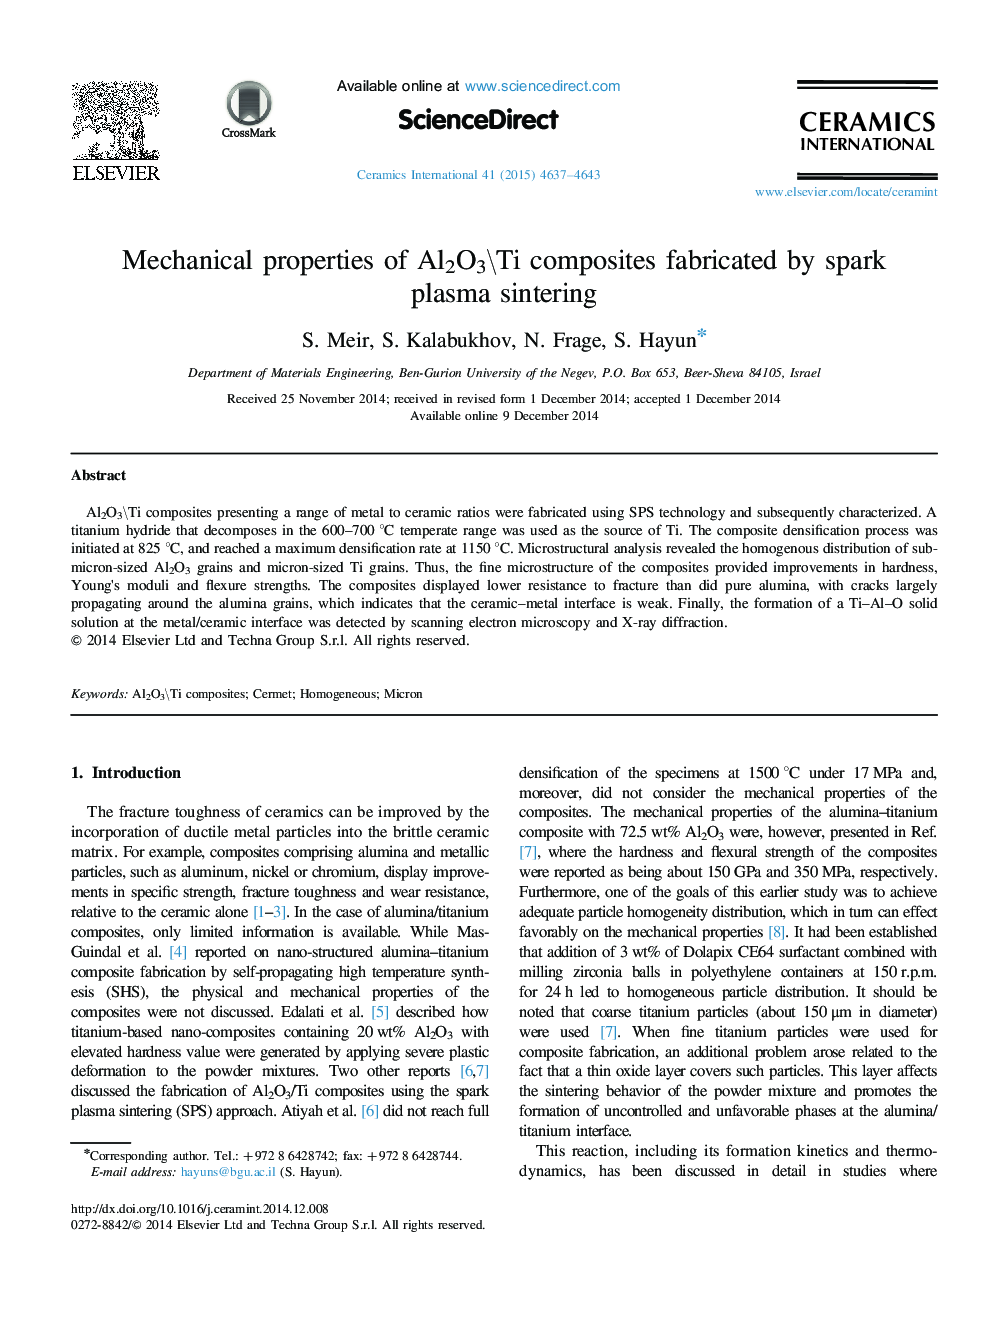 Mechanical properties of Al2O3\Ti composites fabricated by spark plasma sintering